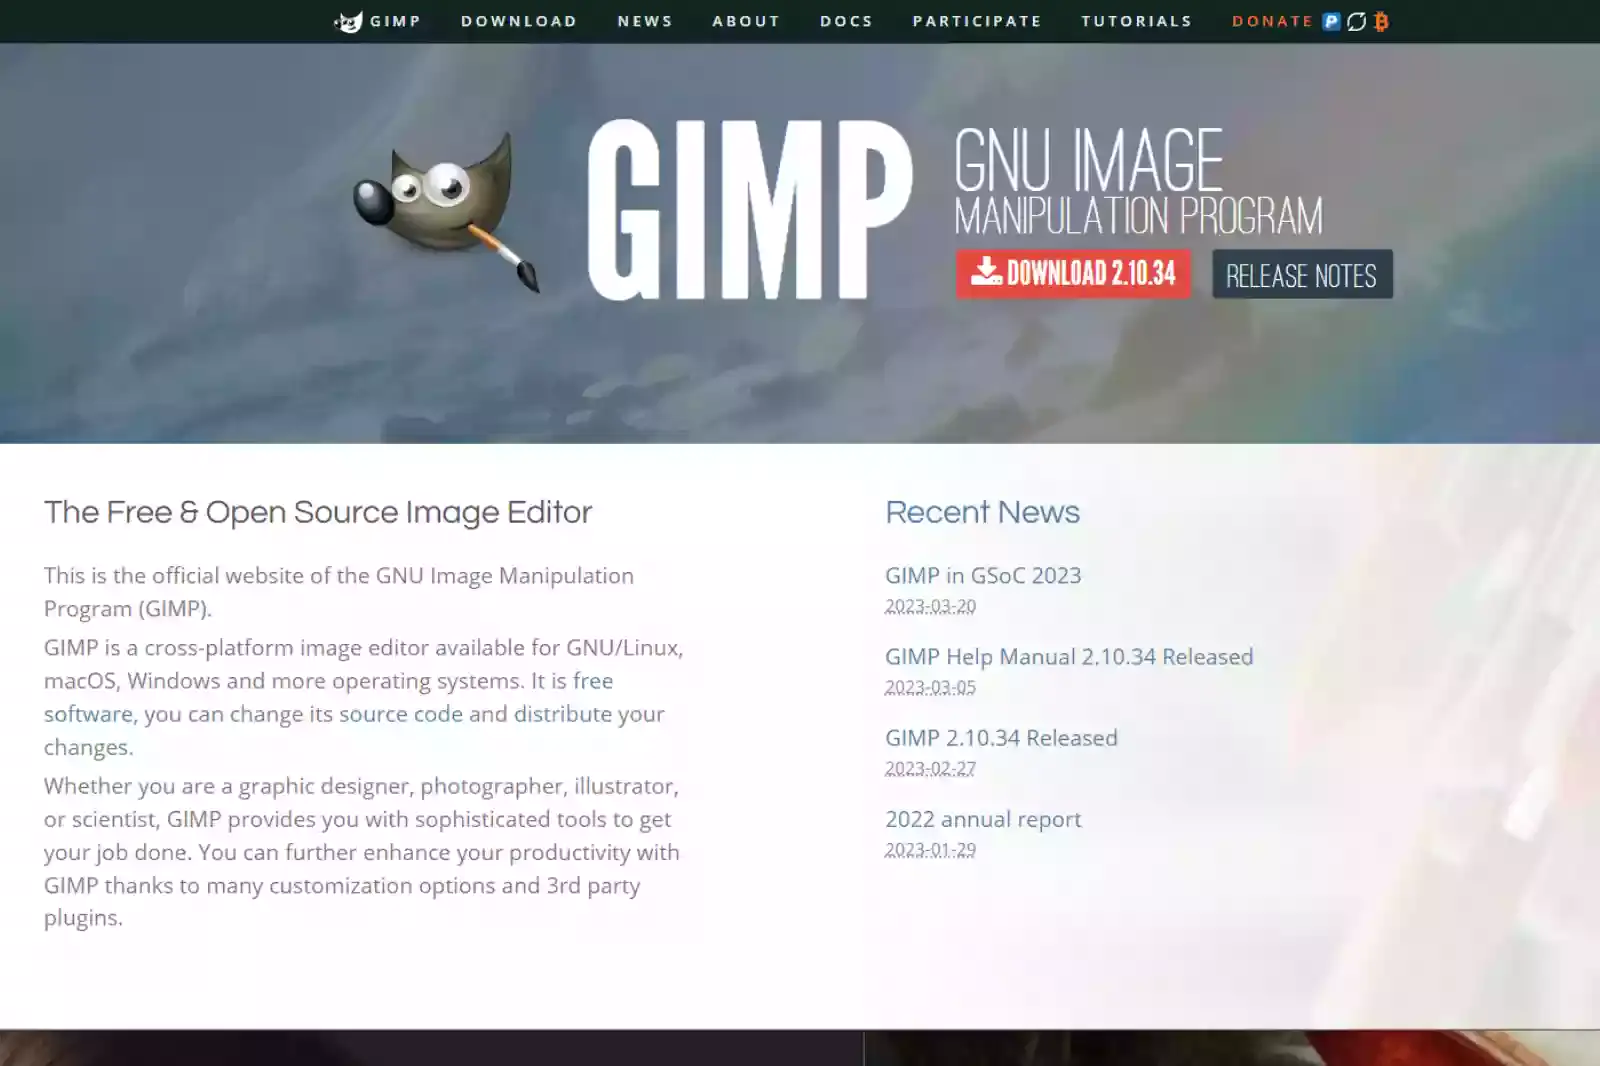 Home Page of GIMP